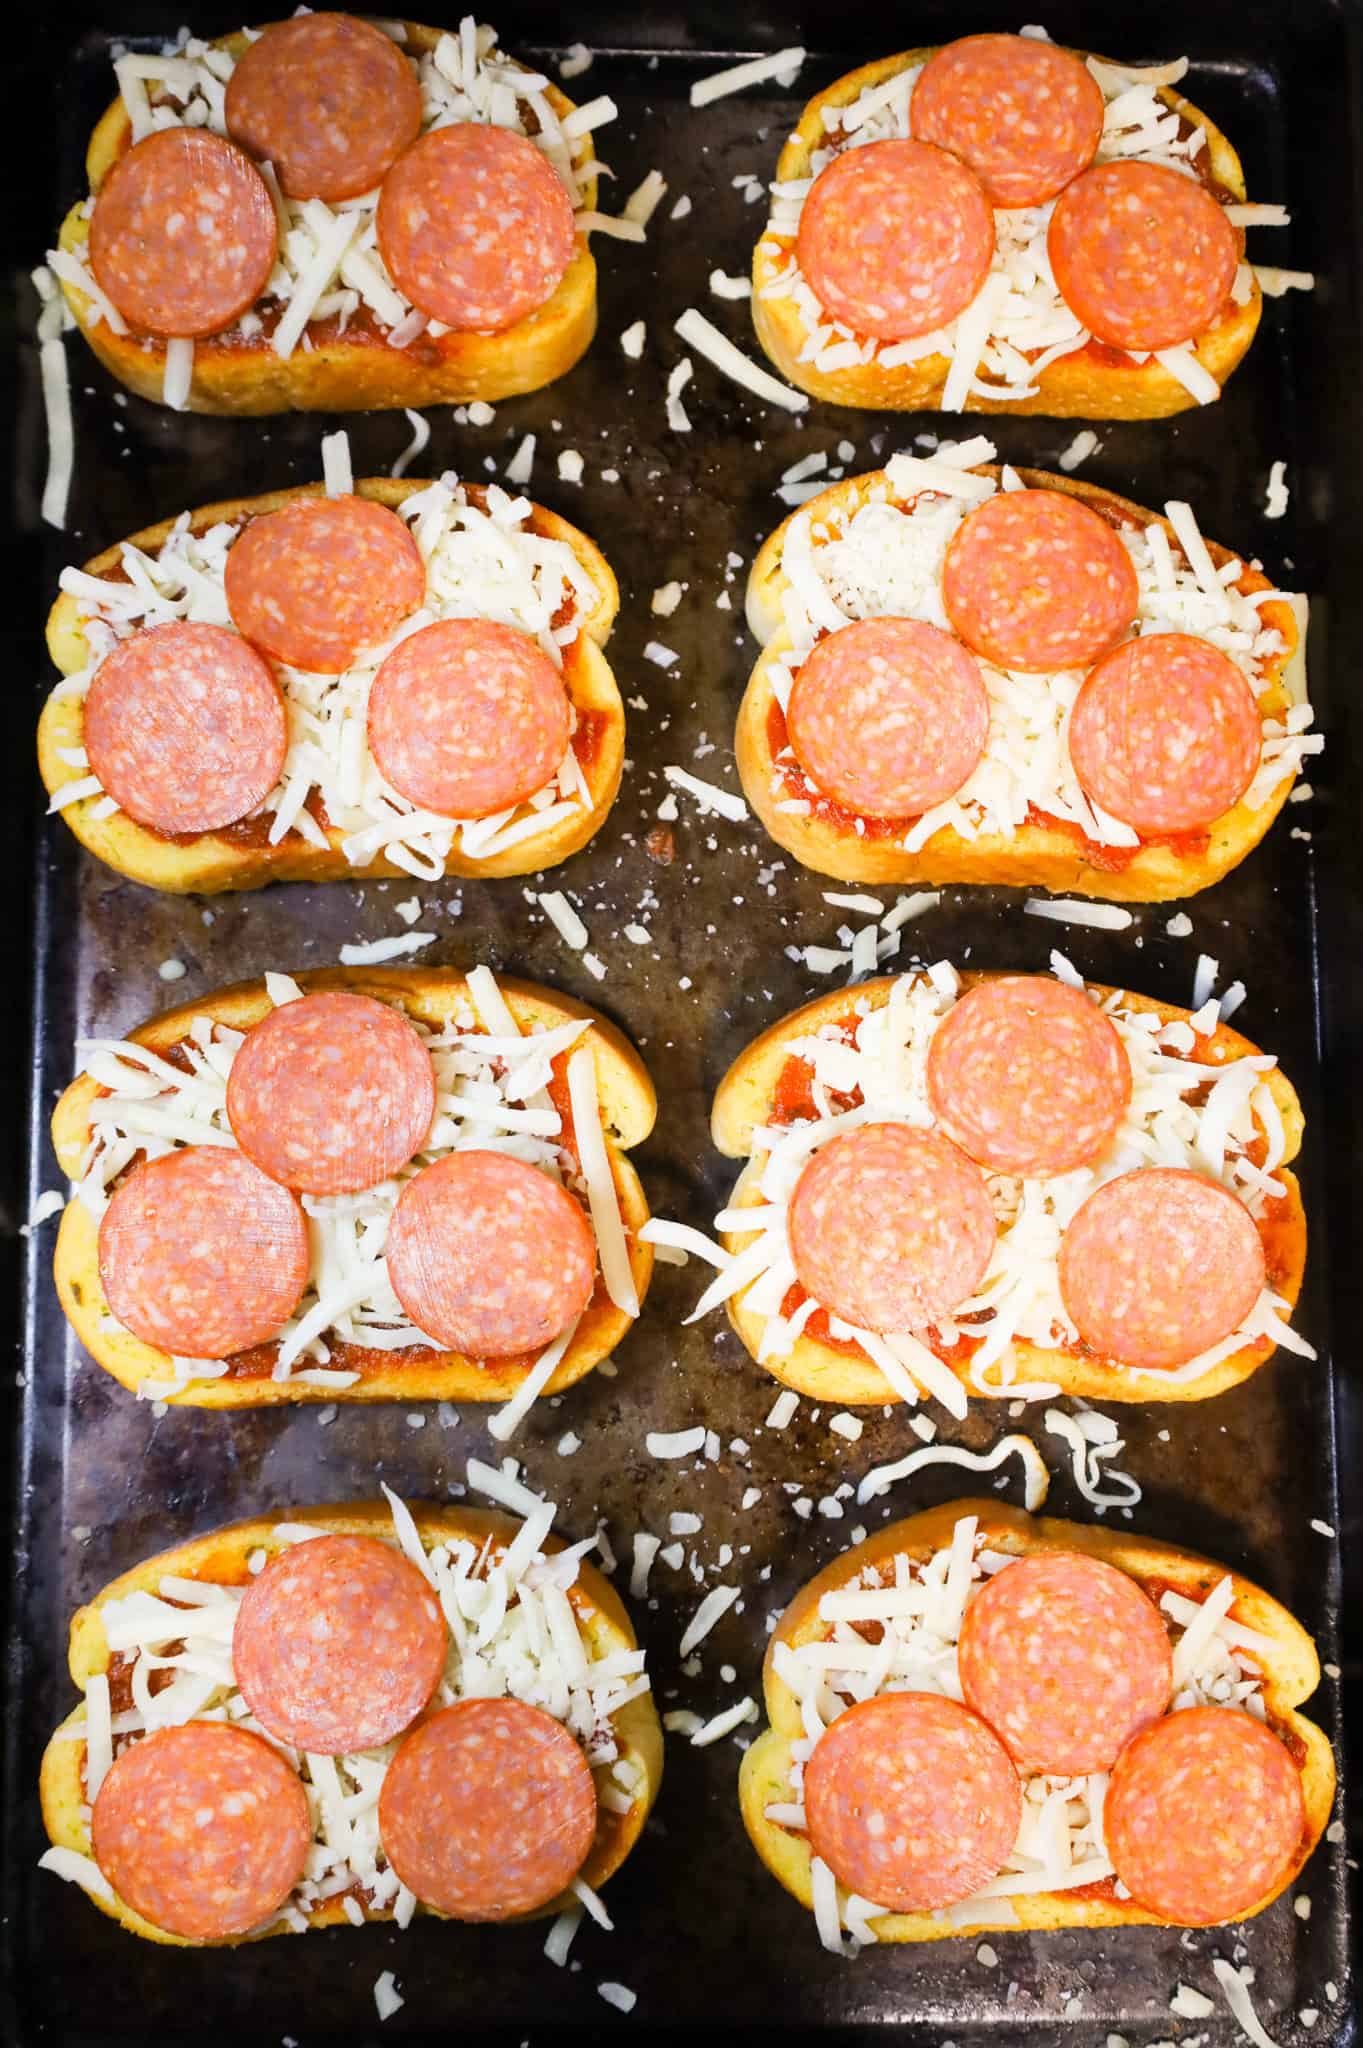 pepperoni slices, mozzarella cheese and pizza sauce on top of garlic texas toast slices on a baking sheet